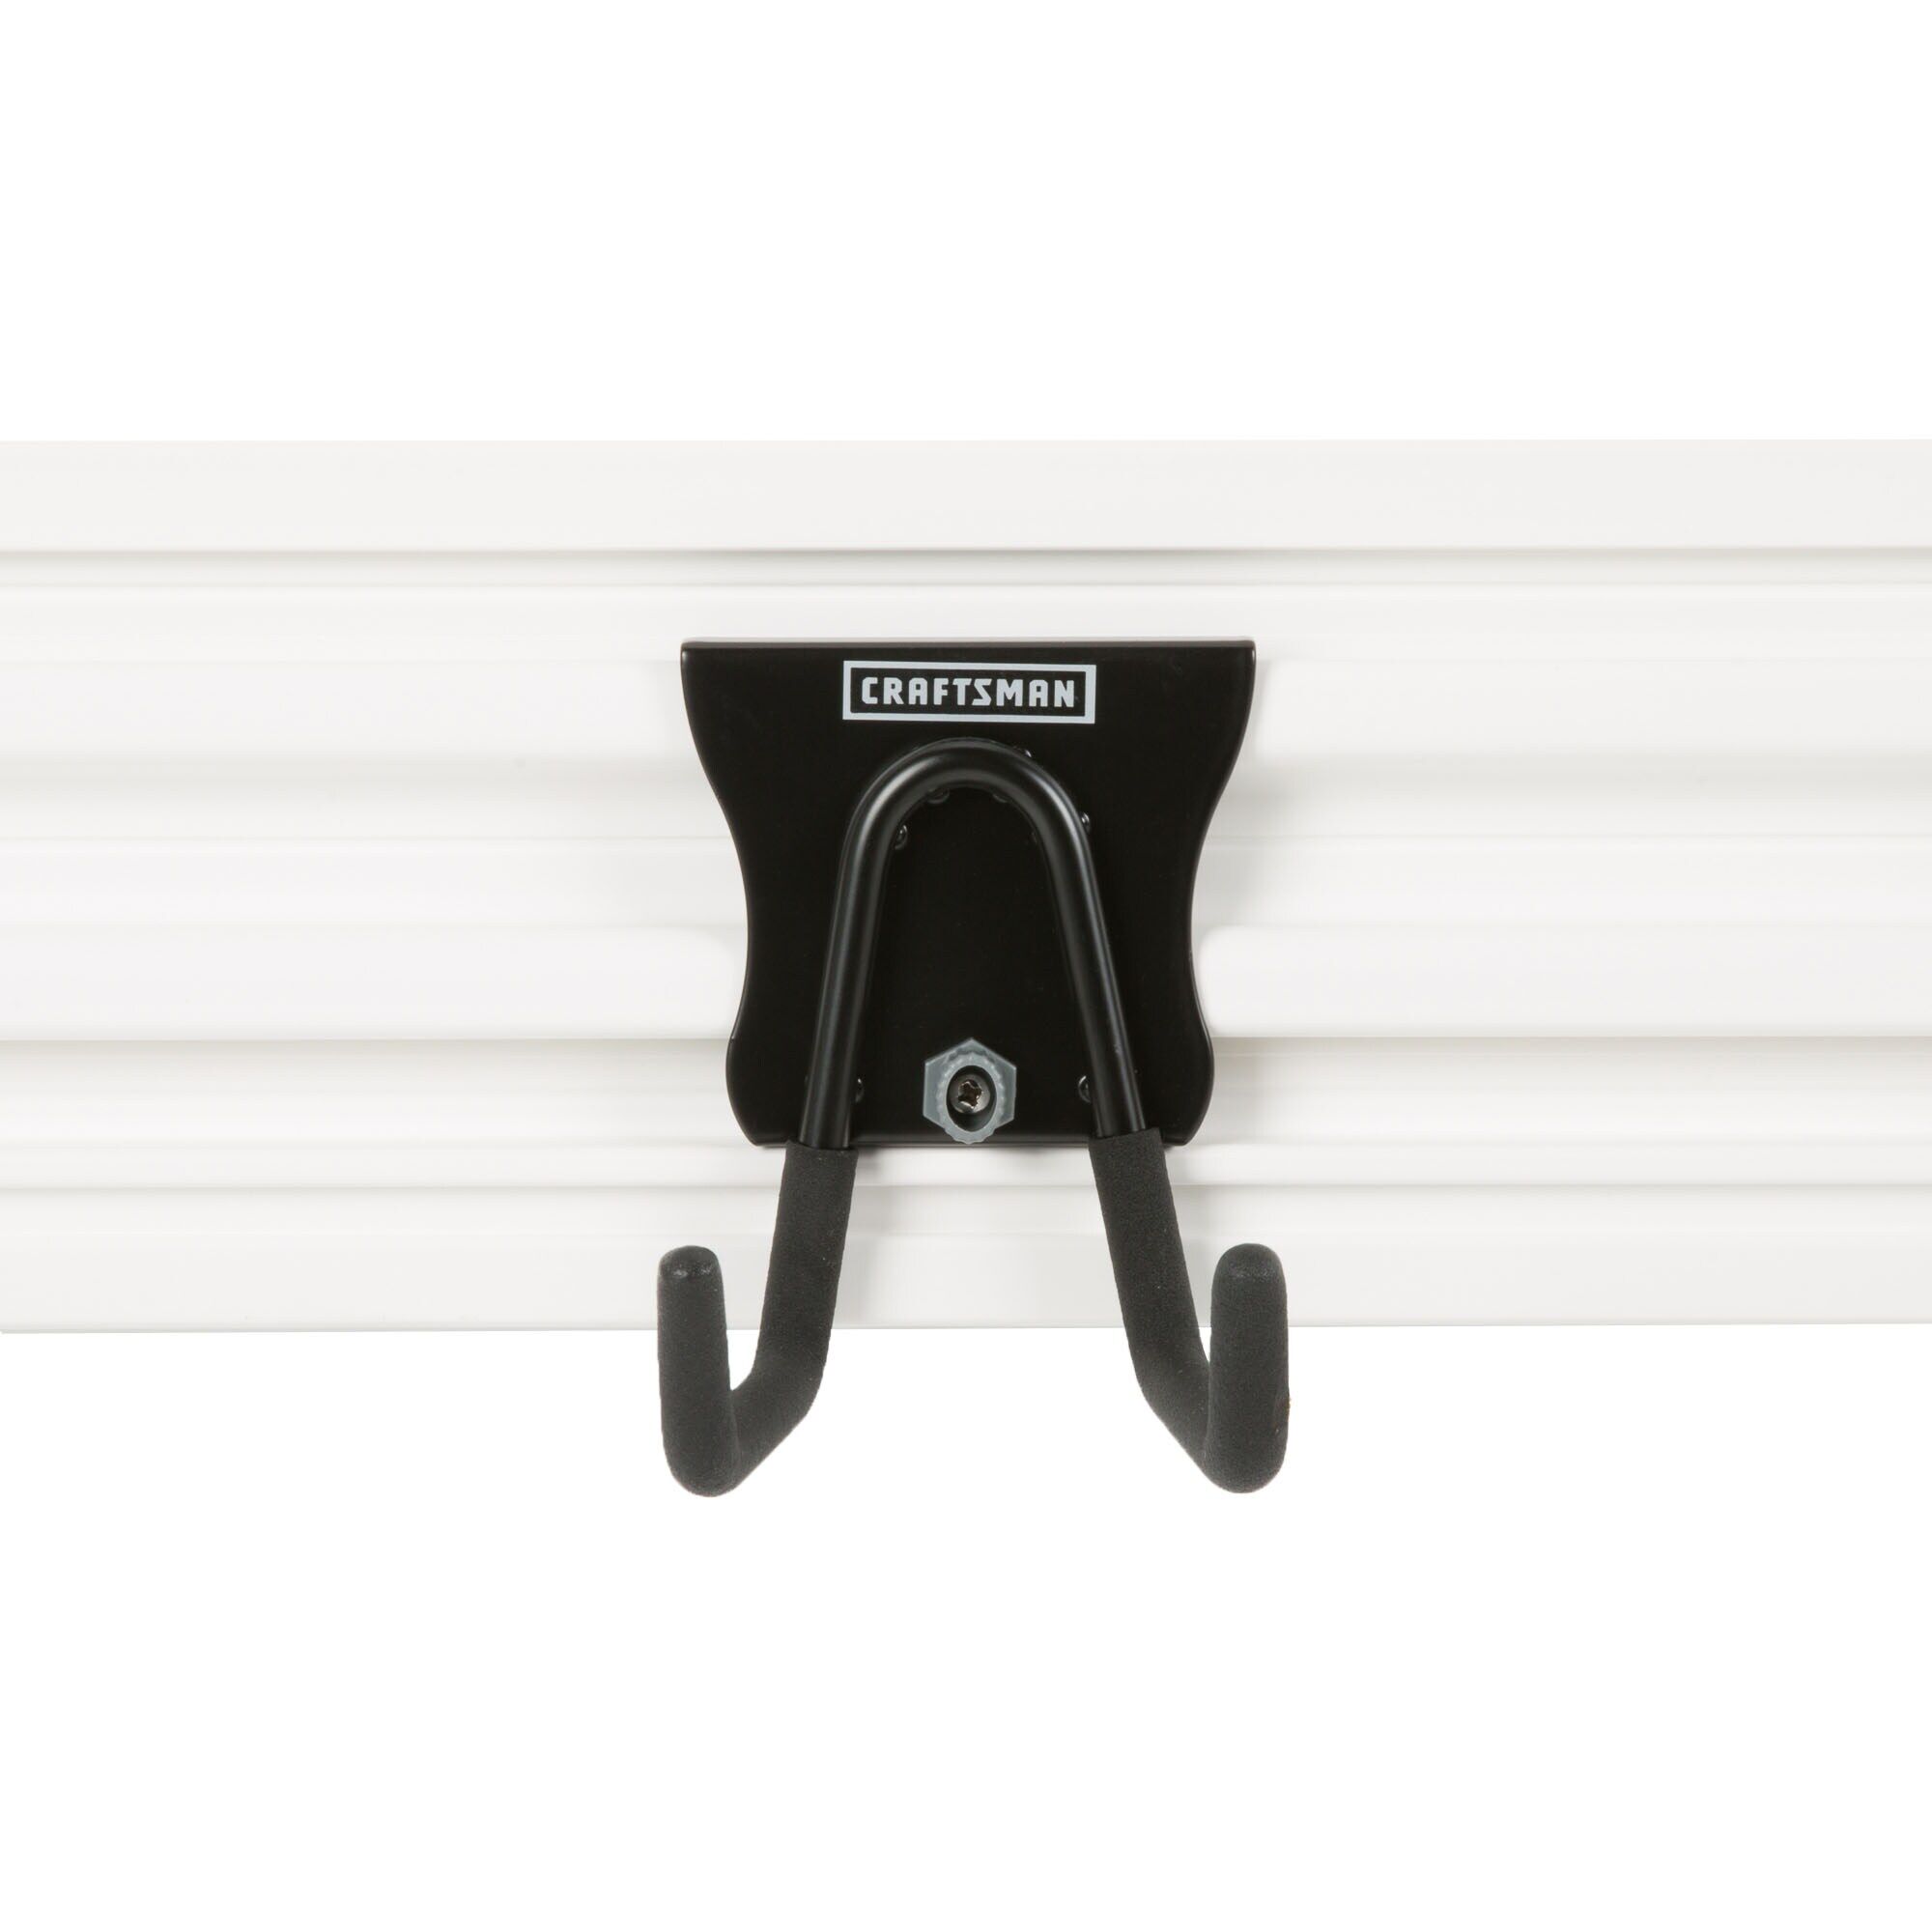 View of CRAFTSMAN Accessories: Metal Storage highlighting product features